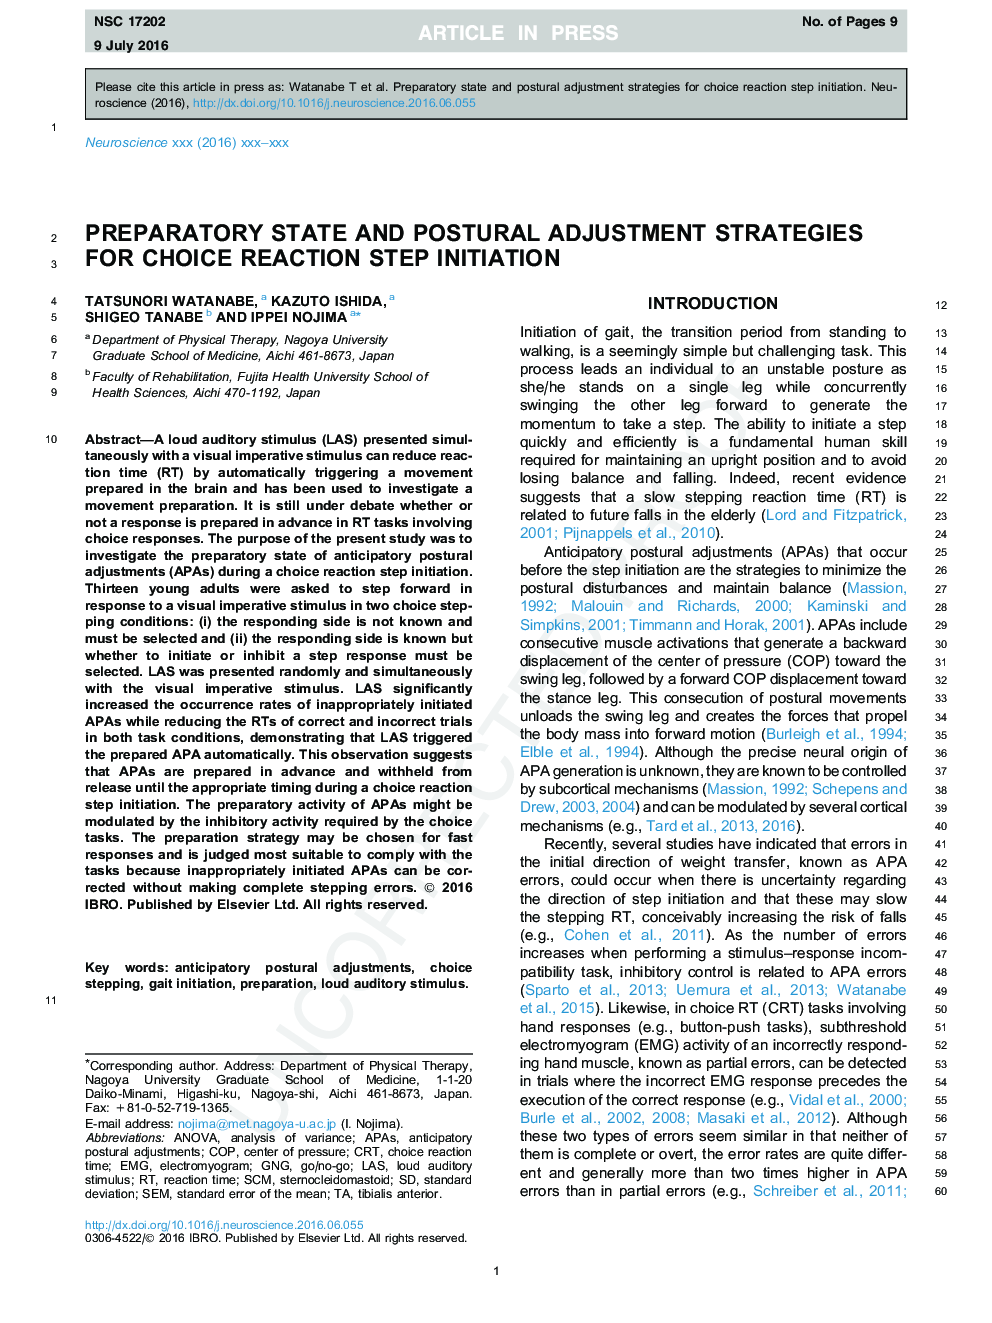 Preparatory state and postural adjustment strategies for choice reaction step initiation